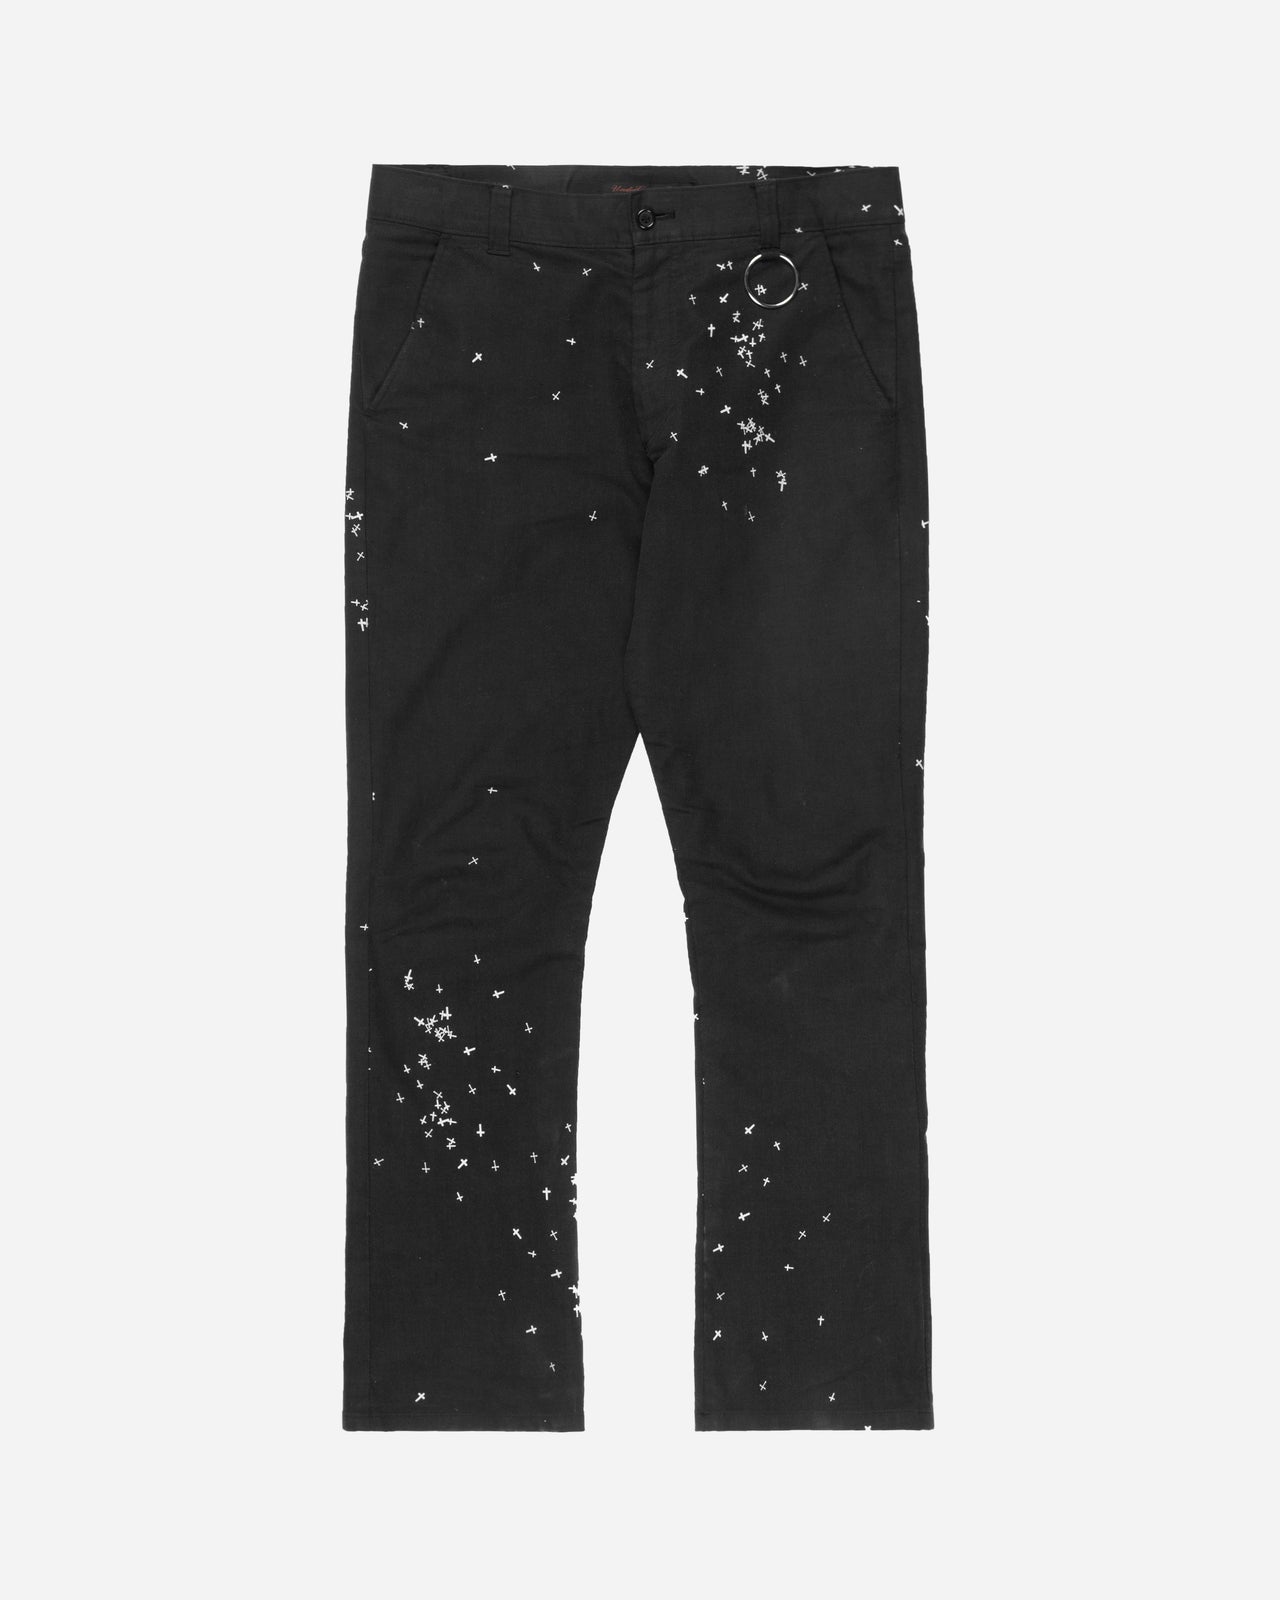 Undercover Cross Trousers - AW02 “Witches Cell Division”